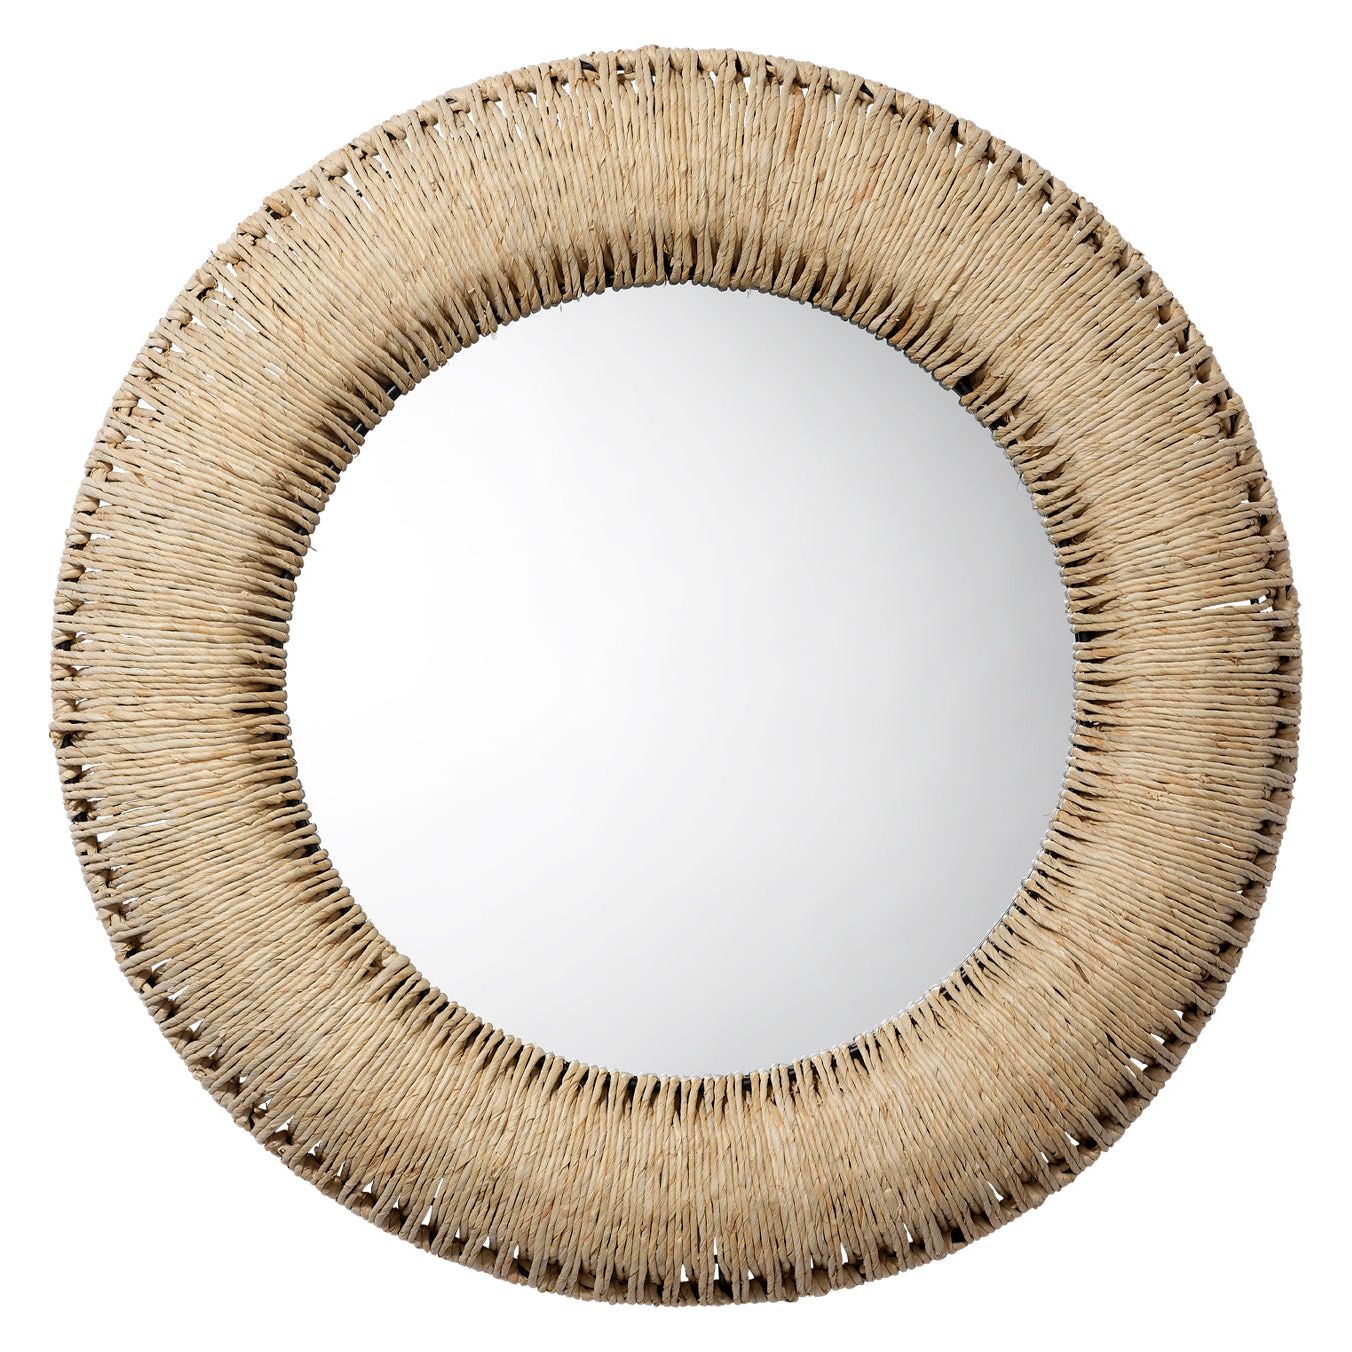 Jamie Young Company - 6HOLL-RNDOW - Round Hollis Mirror -  - Natural